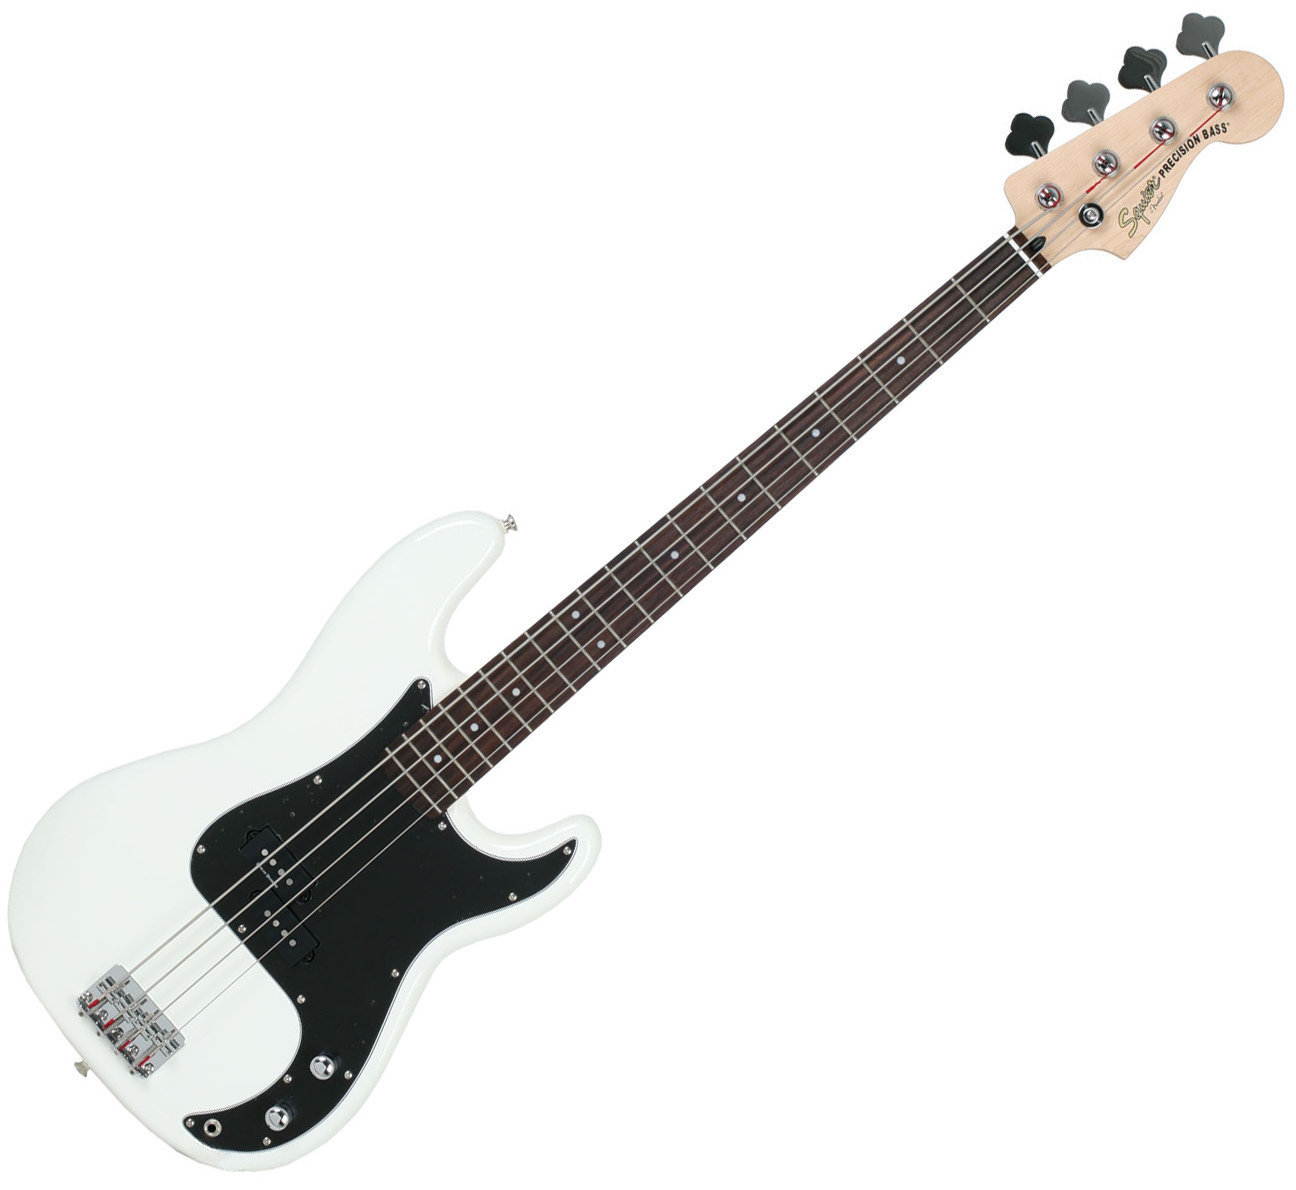 4-strenget basguitar Fender Squier Vintage Modified Precision Bass RW Olympic White